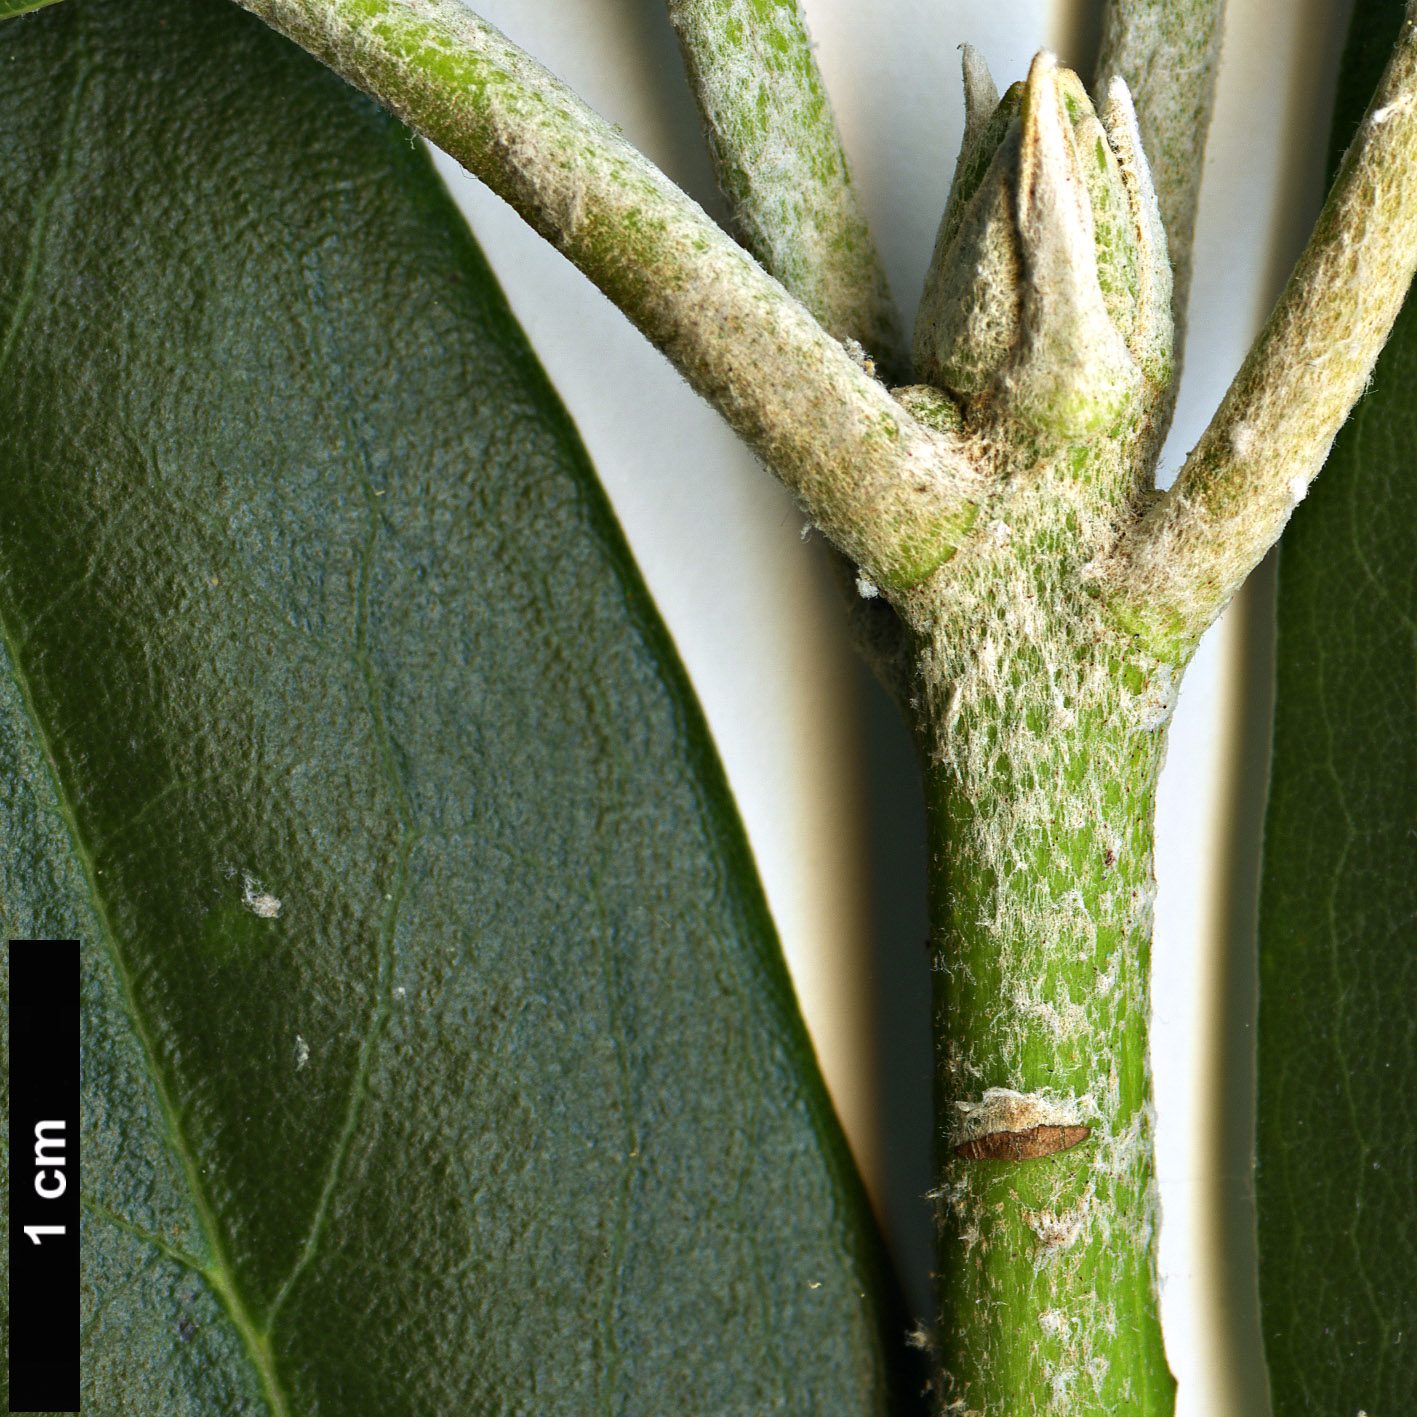 High resolution image: Family: Ericaceae - Genus: Rhododendron - Taxon: degronianum